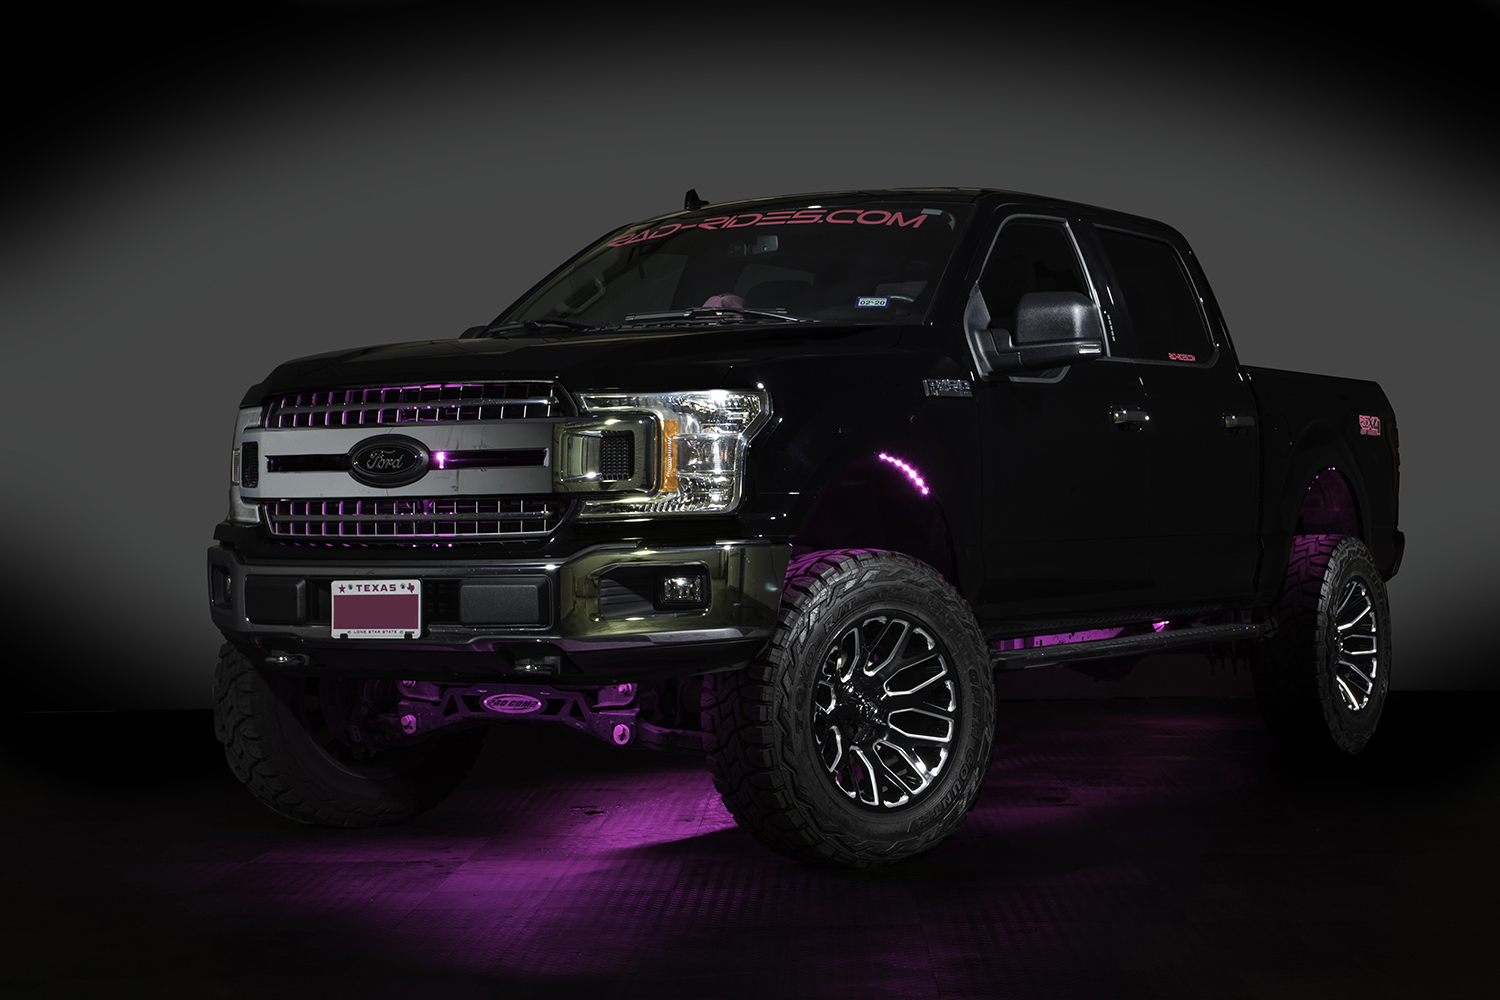 Lifted Custom Ford F-150 4x4 Truck with Custom Led Lighting in Black with  Pink Accents